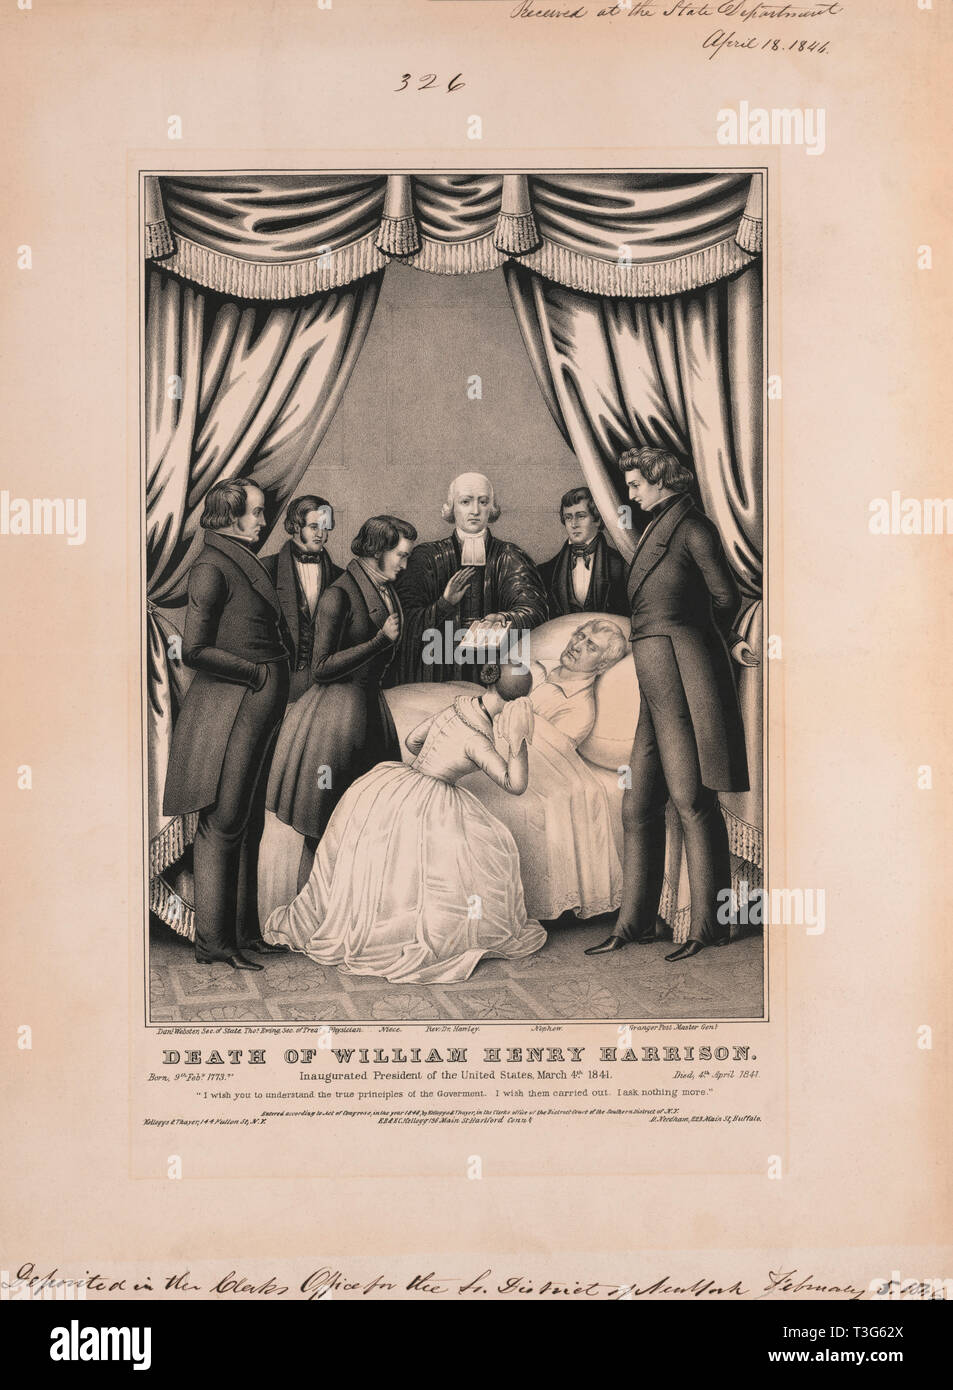 Death of William Henry Harrison, Inaugurated President of the United States March 4th, 1841, Lithograph, Kelloggs & Thayer, 1846 Stock Photo